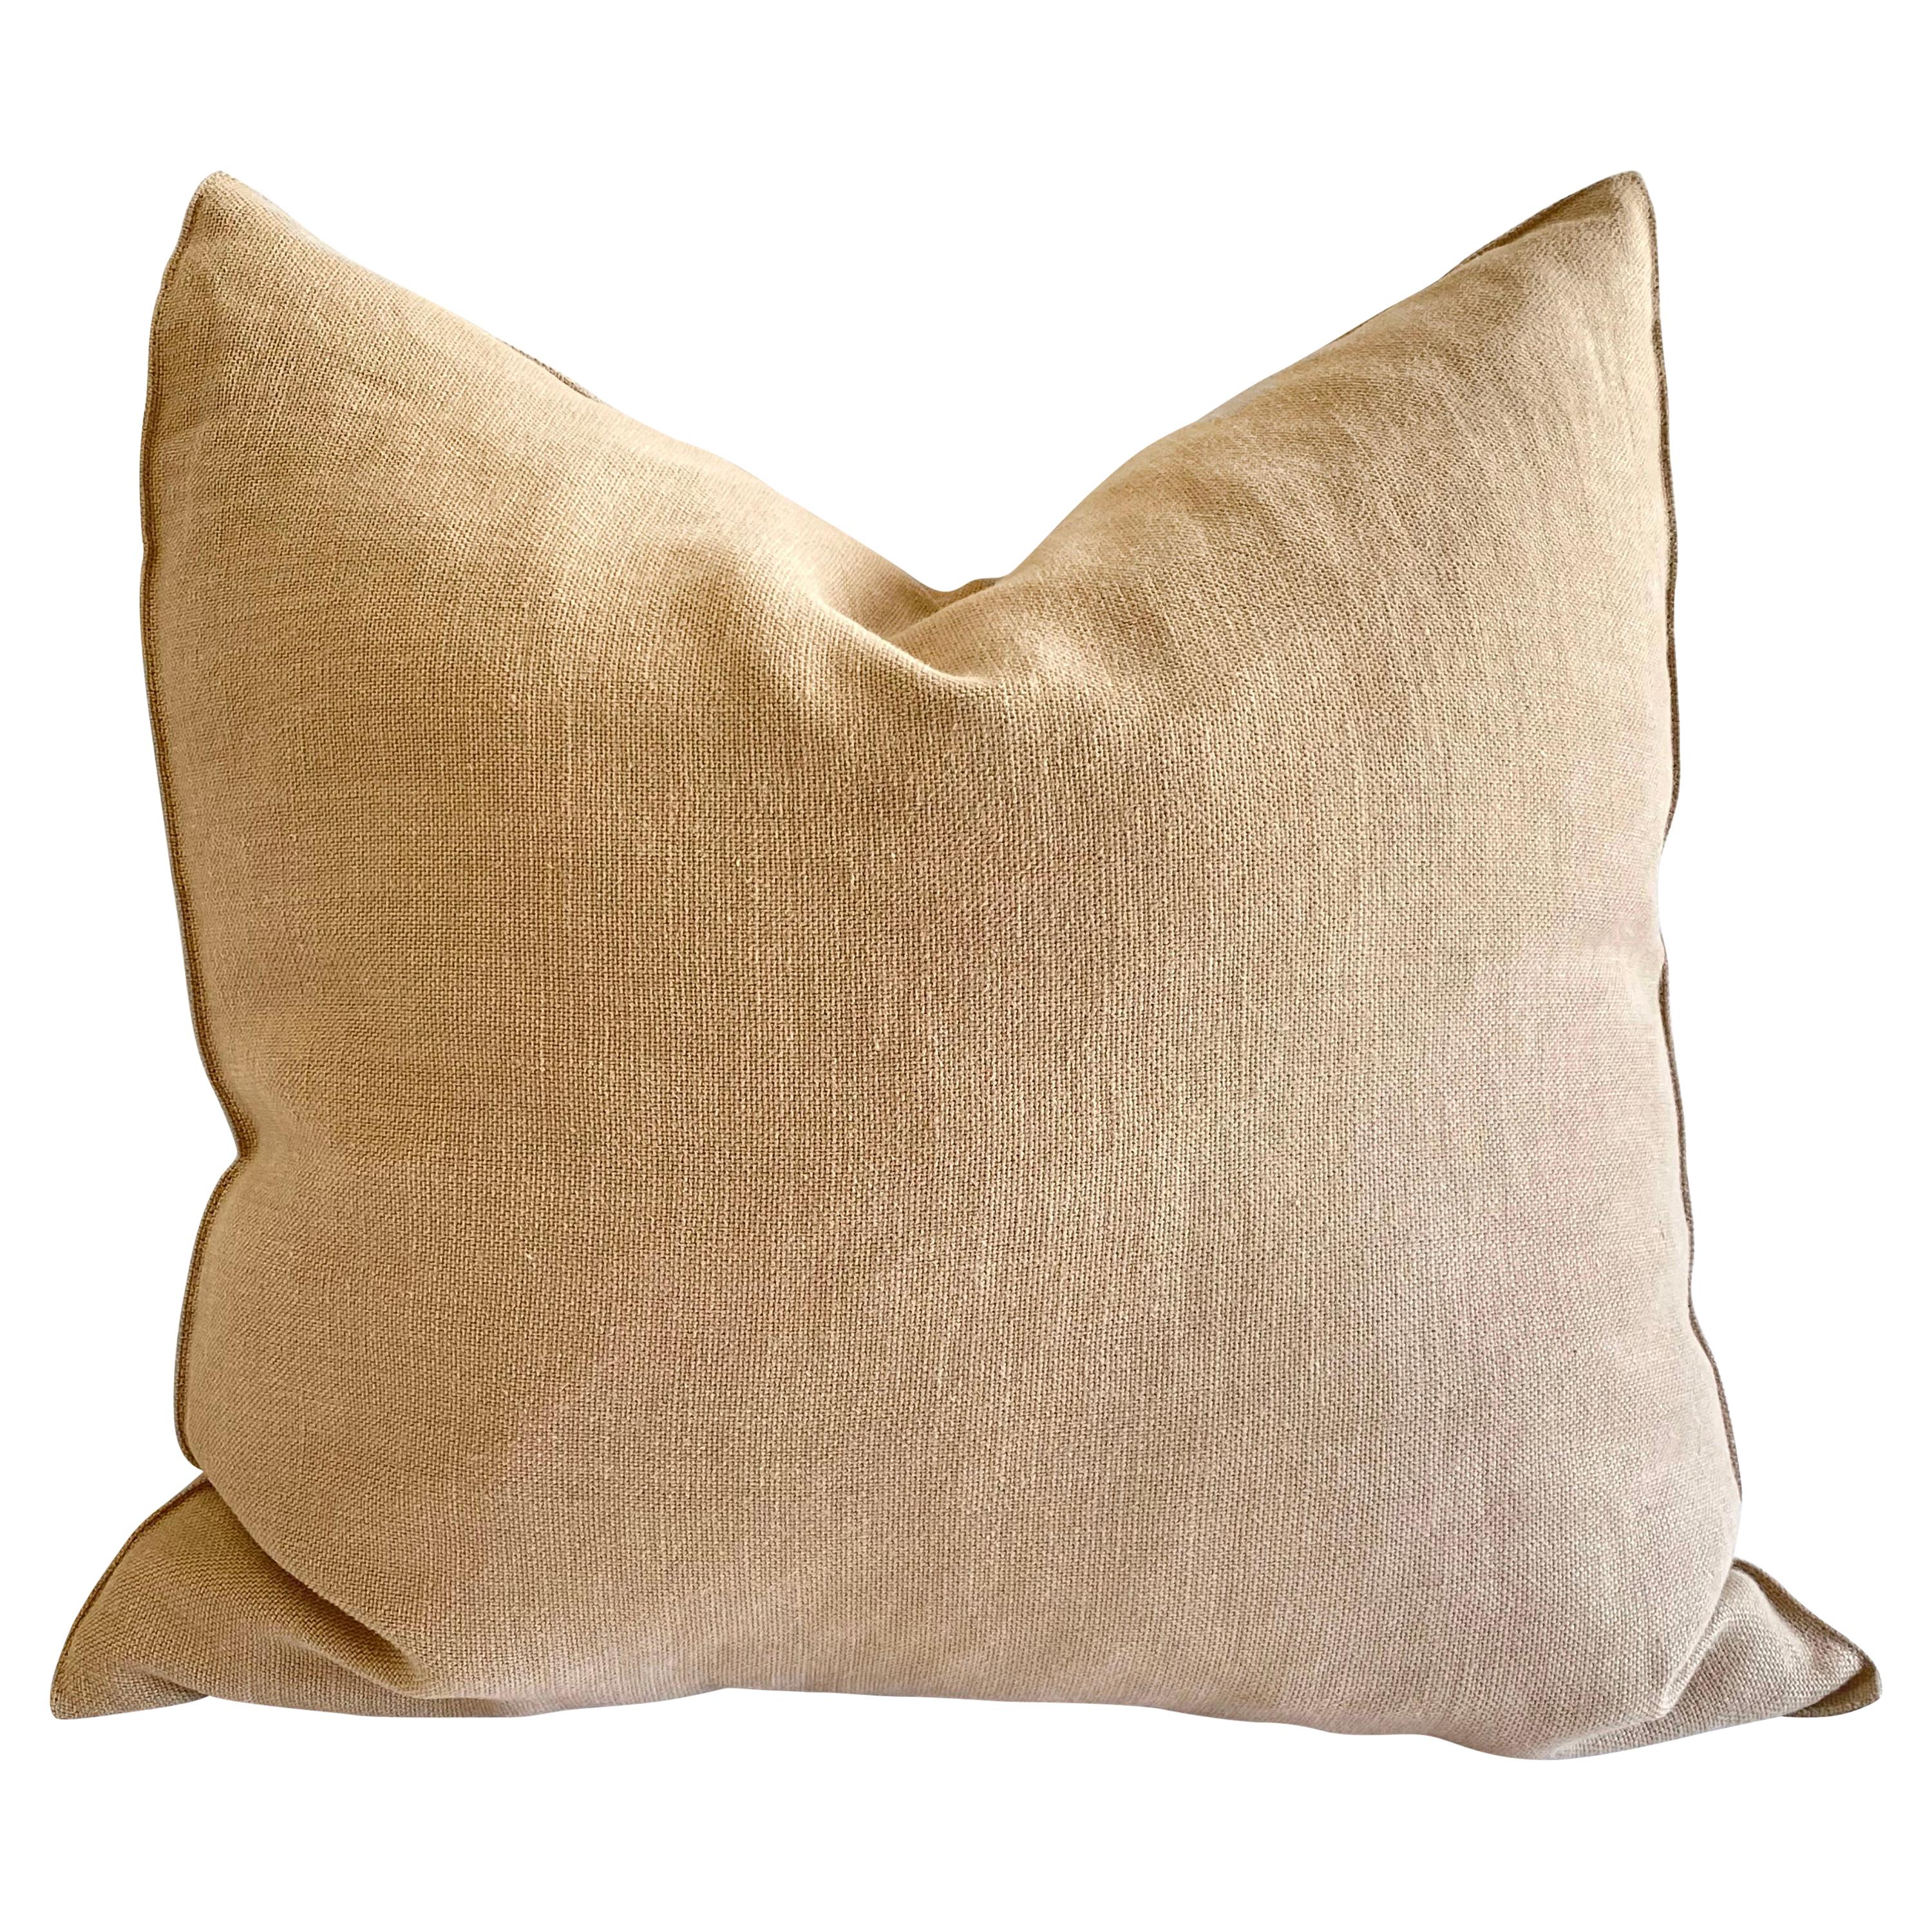 Belgian Linen Accent Pillow Cover in Nude Apricot Color For Sale